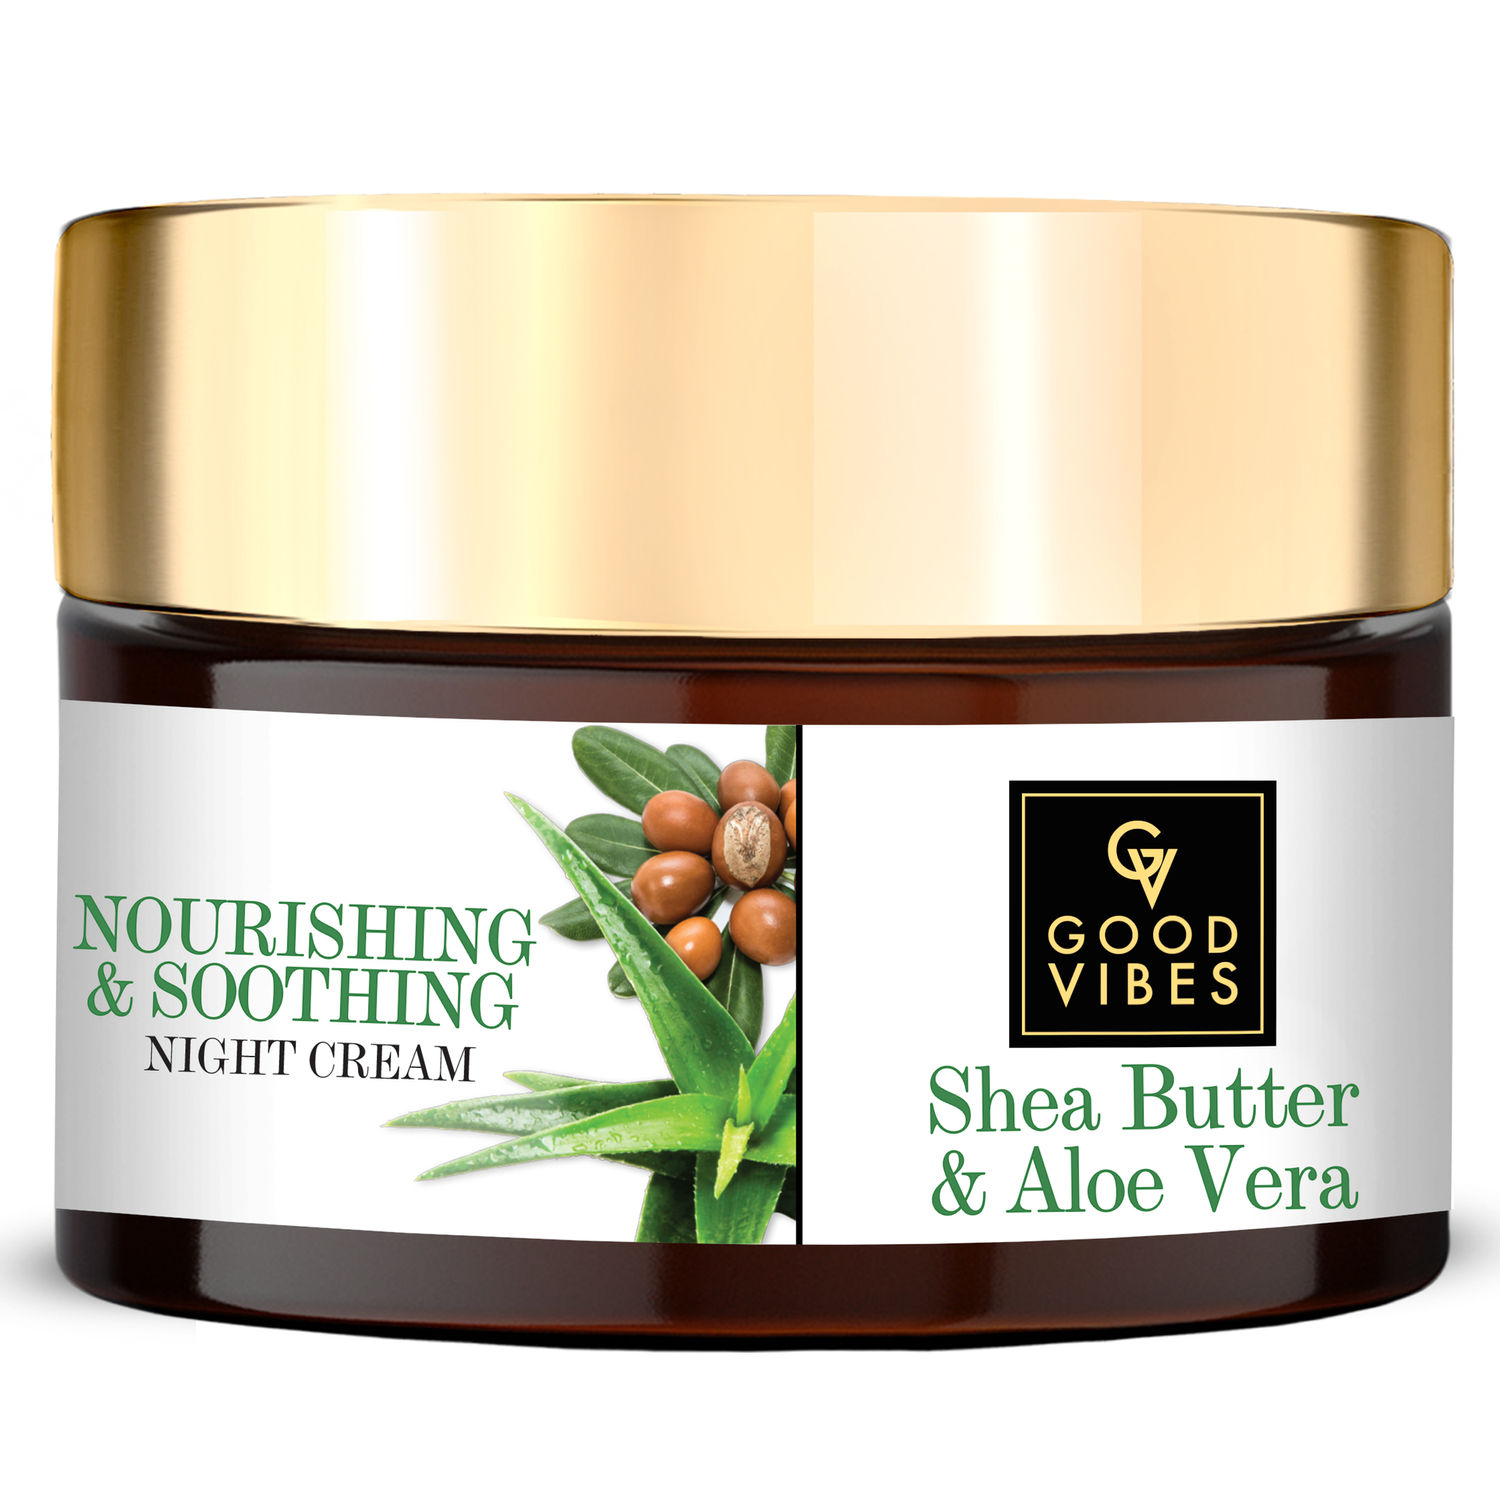 Good Vibes Shea Butter + Aloe Vera Nourishing + Soothing Night Cream | Moisturizing, Soothing | No Parabens, No Sulphates, No Mineral Oil (50 gm)